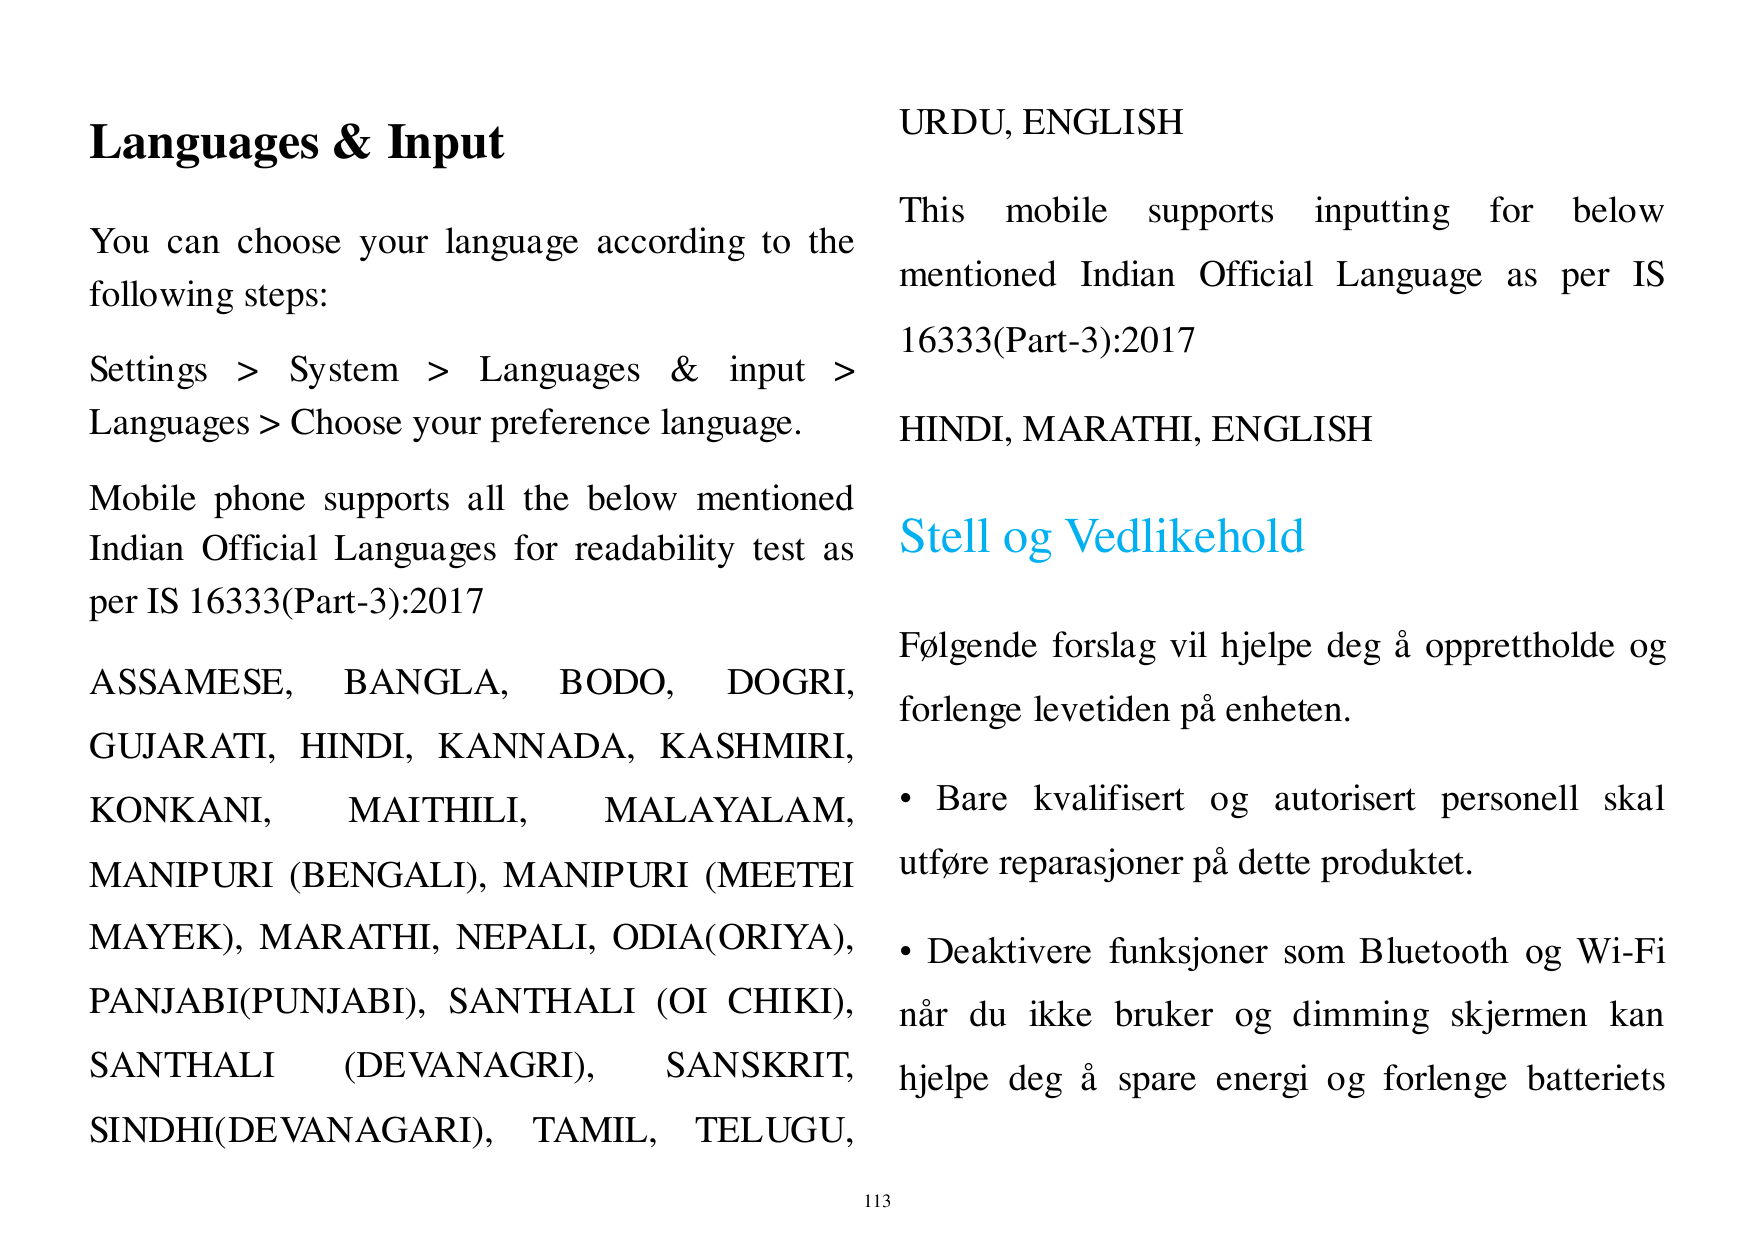 URDU, ENGLISHLanguages & InputThisYou can choose your language according to thefollowing steps:mobilesupportsinputtingforbelowme